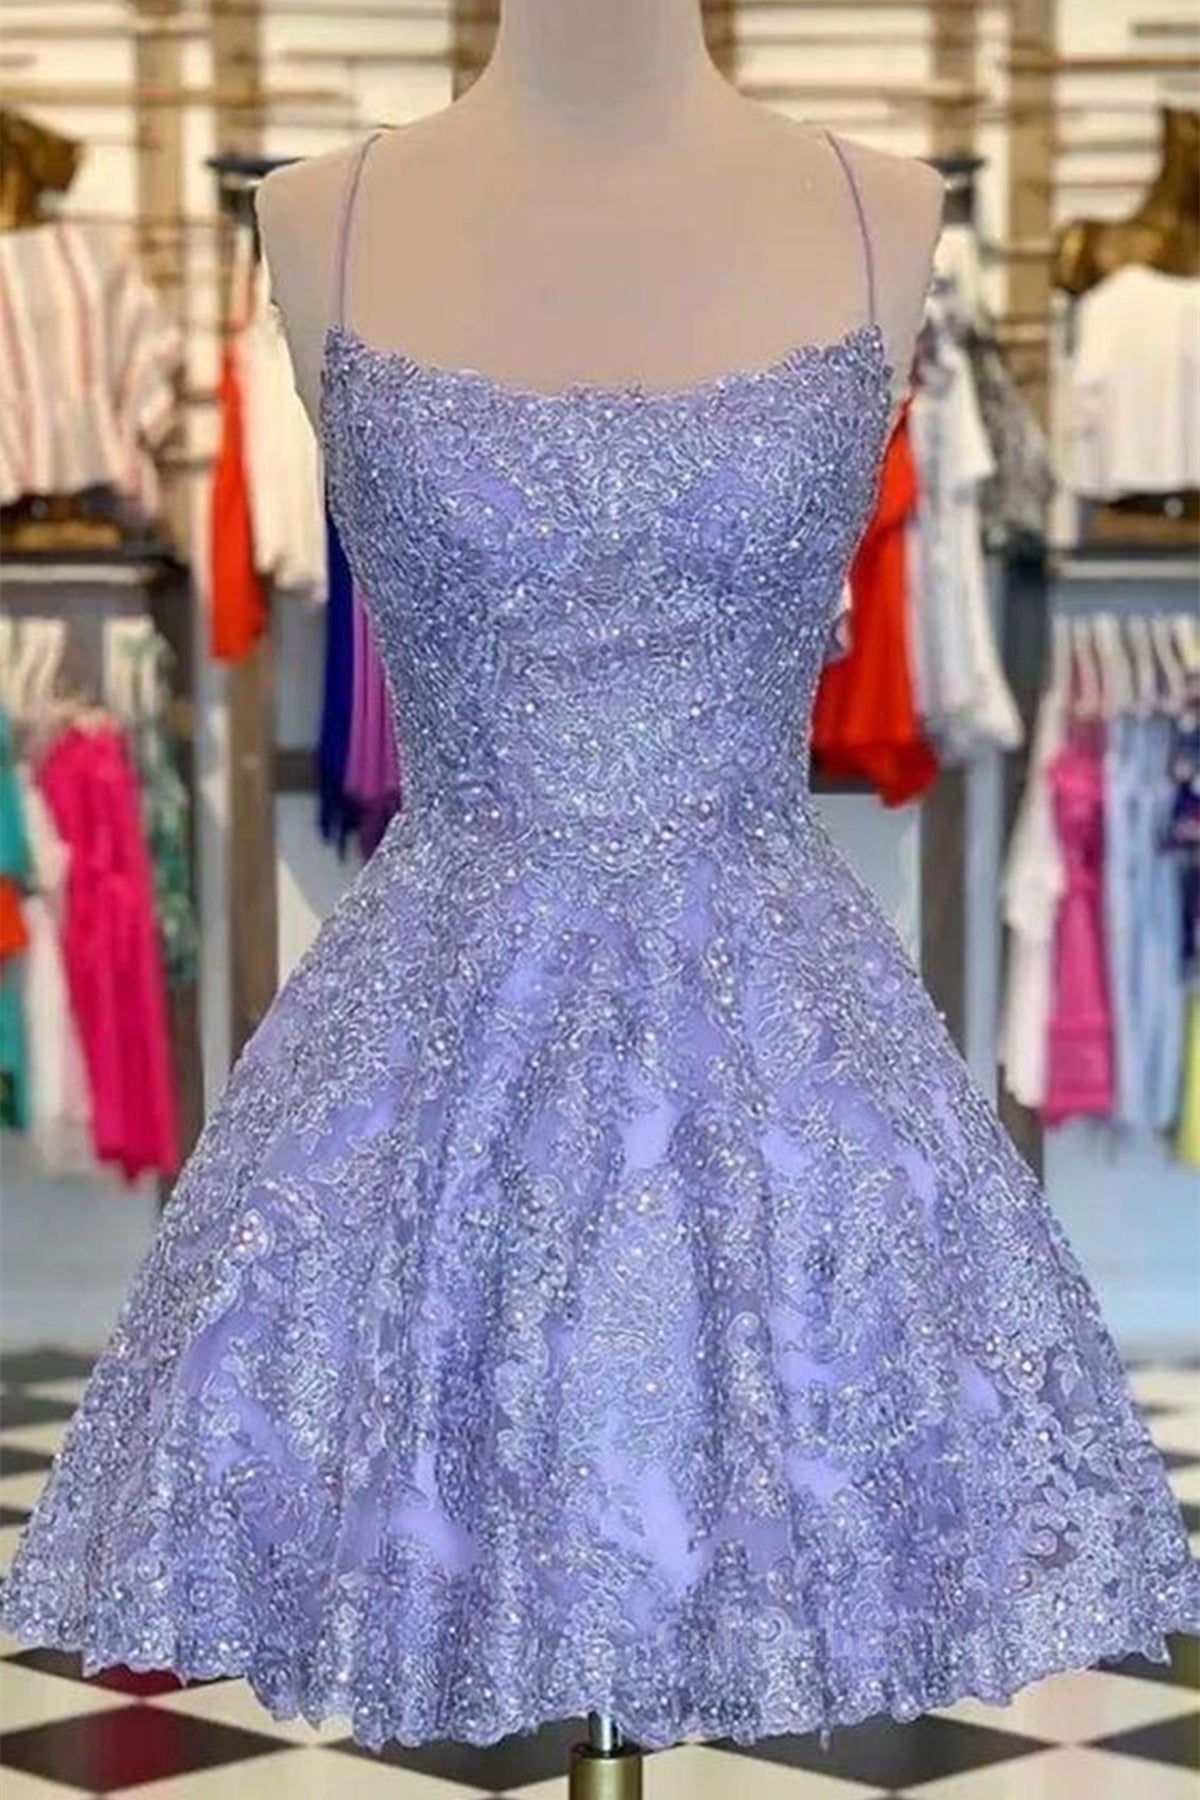 Princess Beaded Purple Lace Corset Prom Dress, Short Purple Lace Corset Homecoming Dress, Purple Corset Formal Evening Dress outfit, Bridesmaid Dresses For Winter Wedding